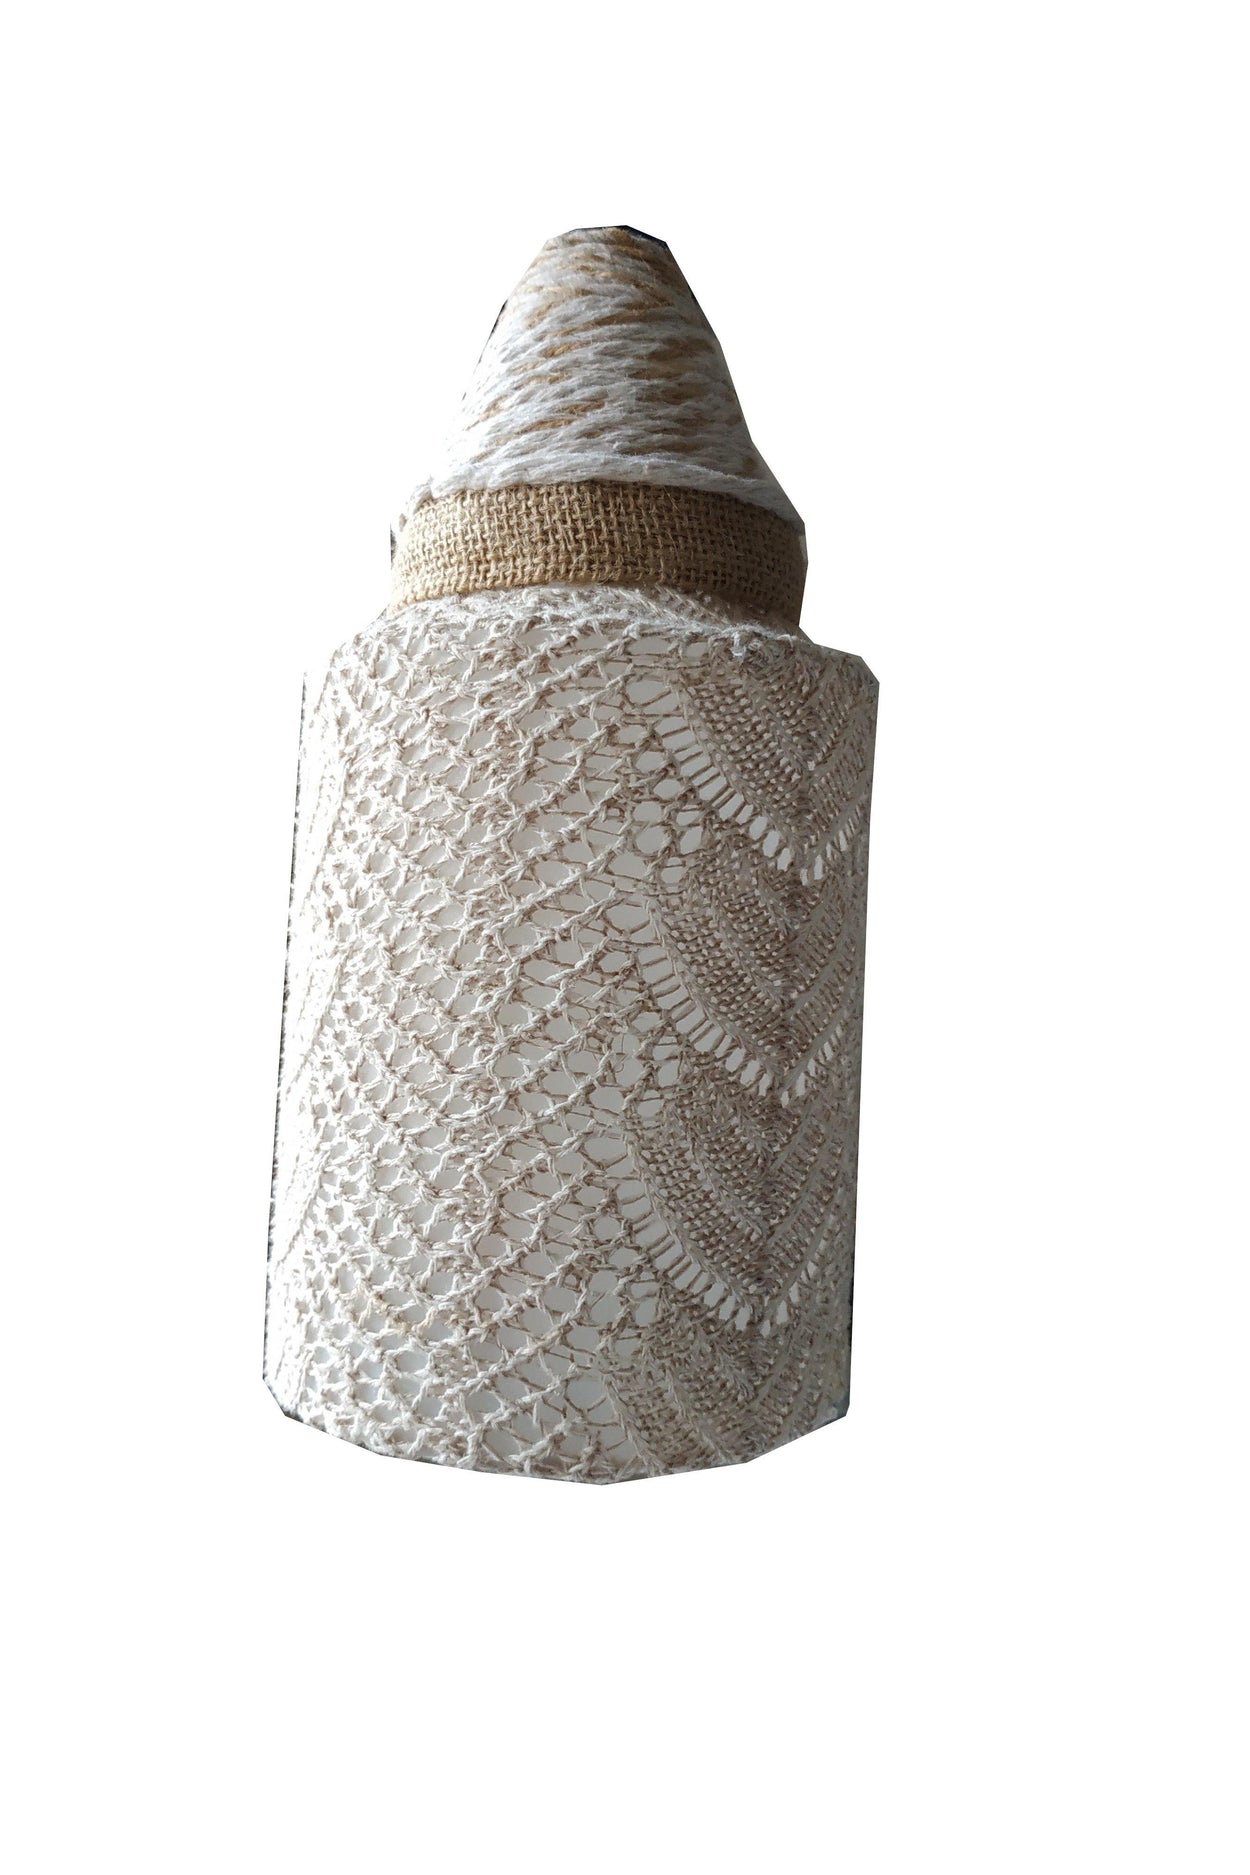 Unique handmade table lamp and a lampshade made of lace fabric - GLEZANT designer goods store. 